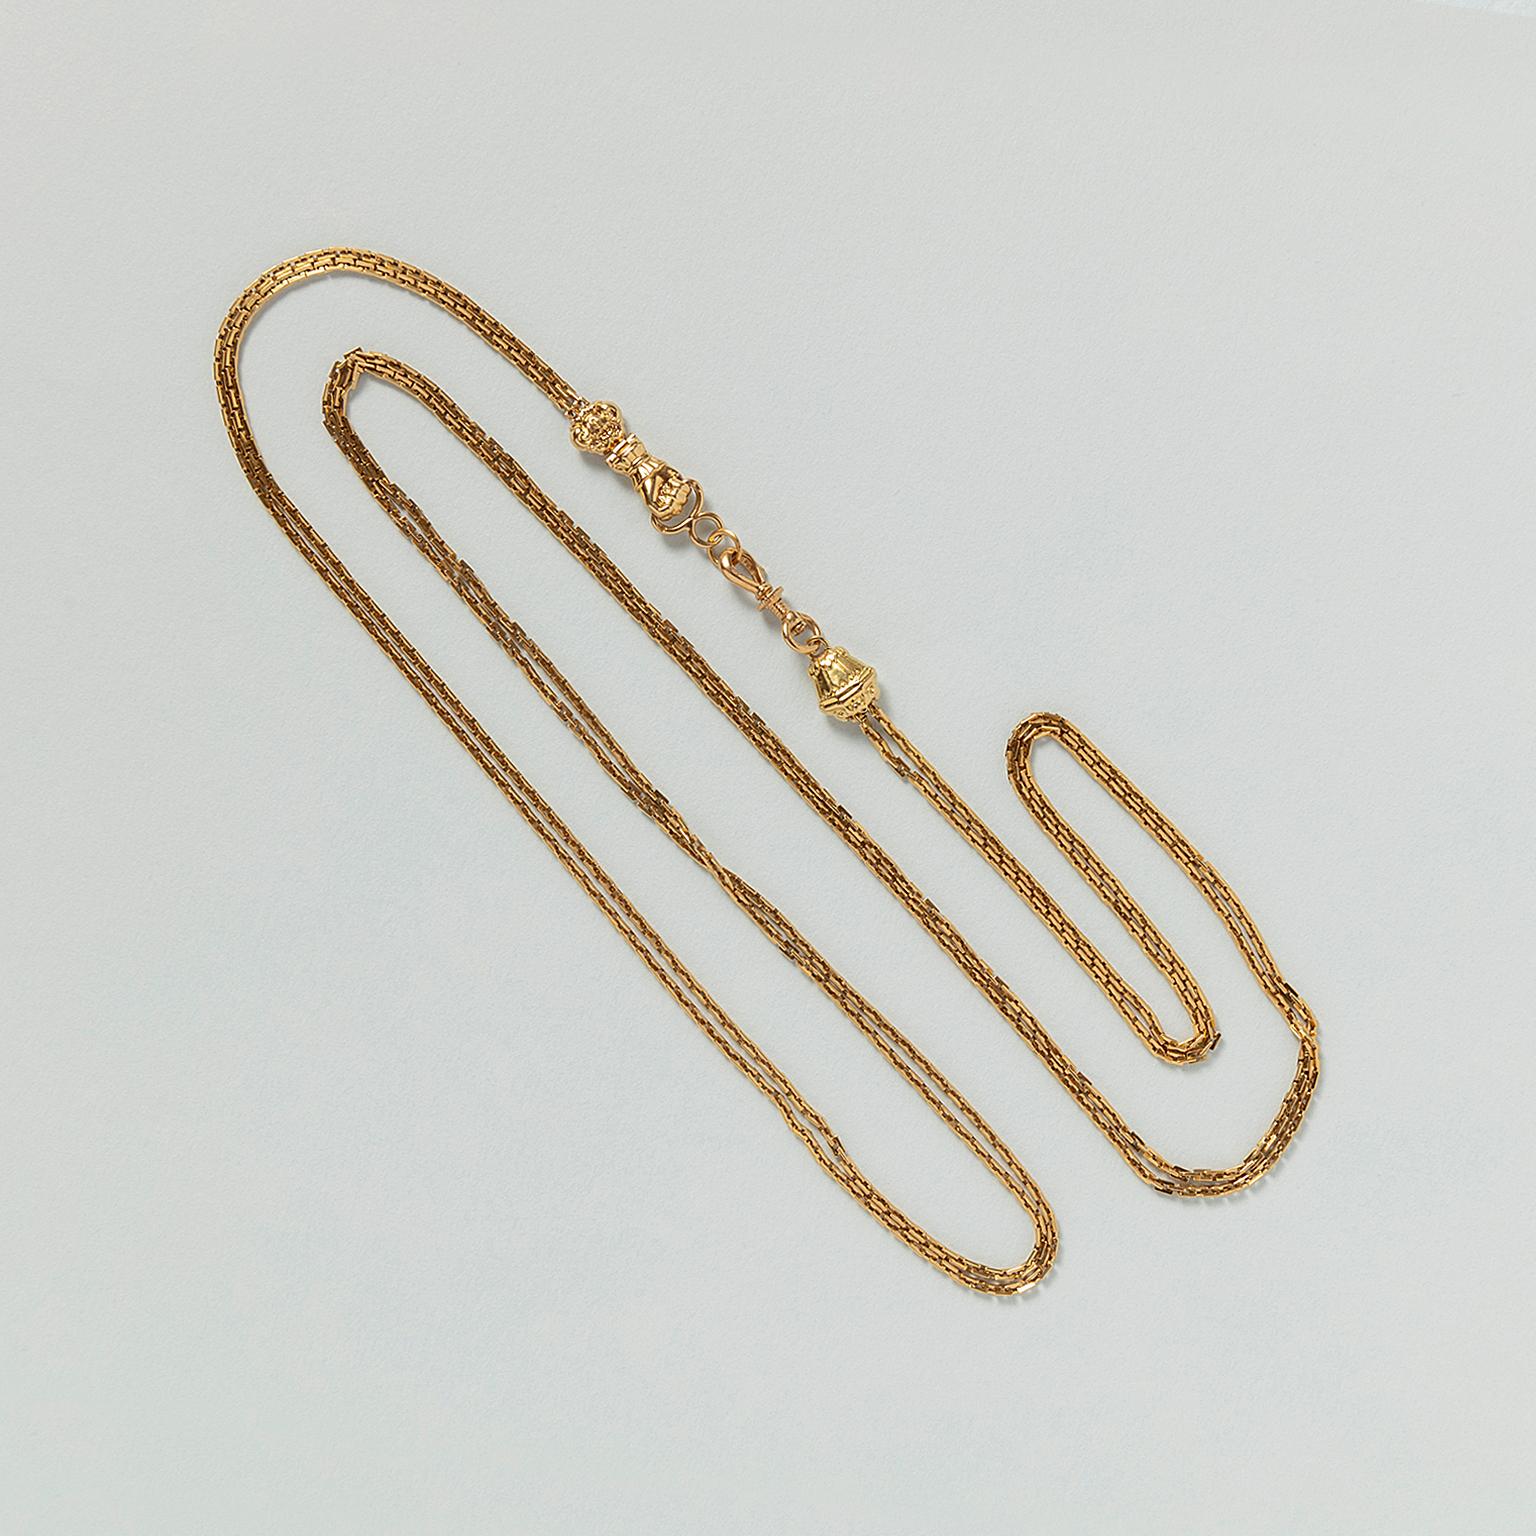 An 18 carat yellow gold watch chain necklace with rectangular links and a richly decorated gold sliding bead and an opening lobster clasp at the end and a hand holding a clasp and the other end of the lock, France, circa 1850.

weight: 19.16